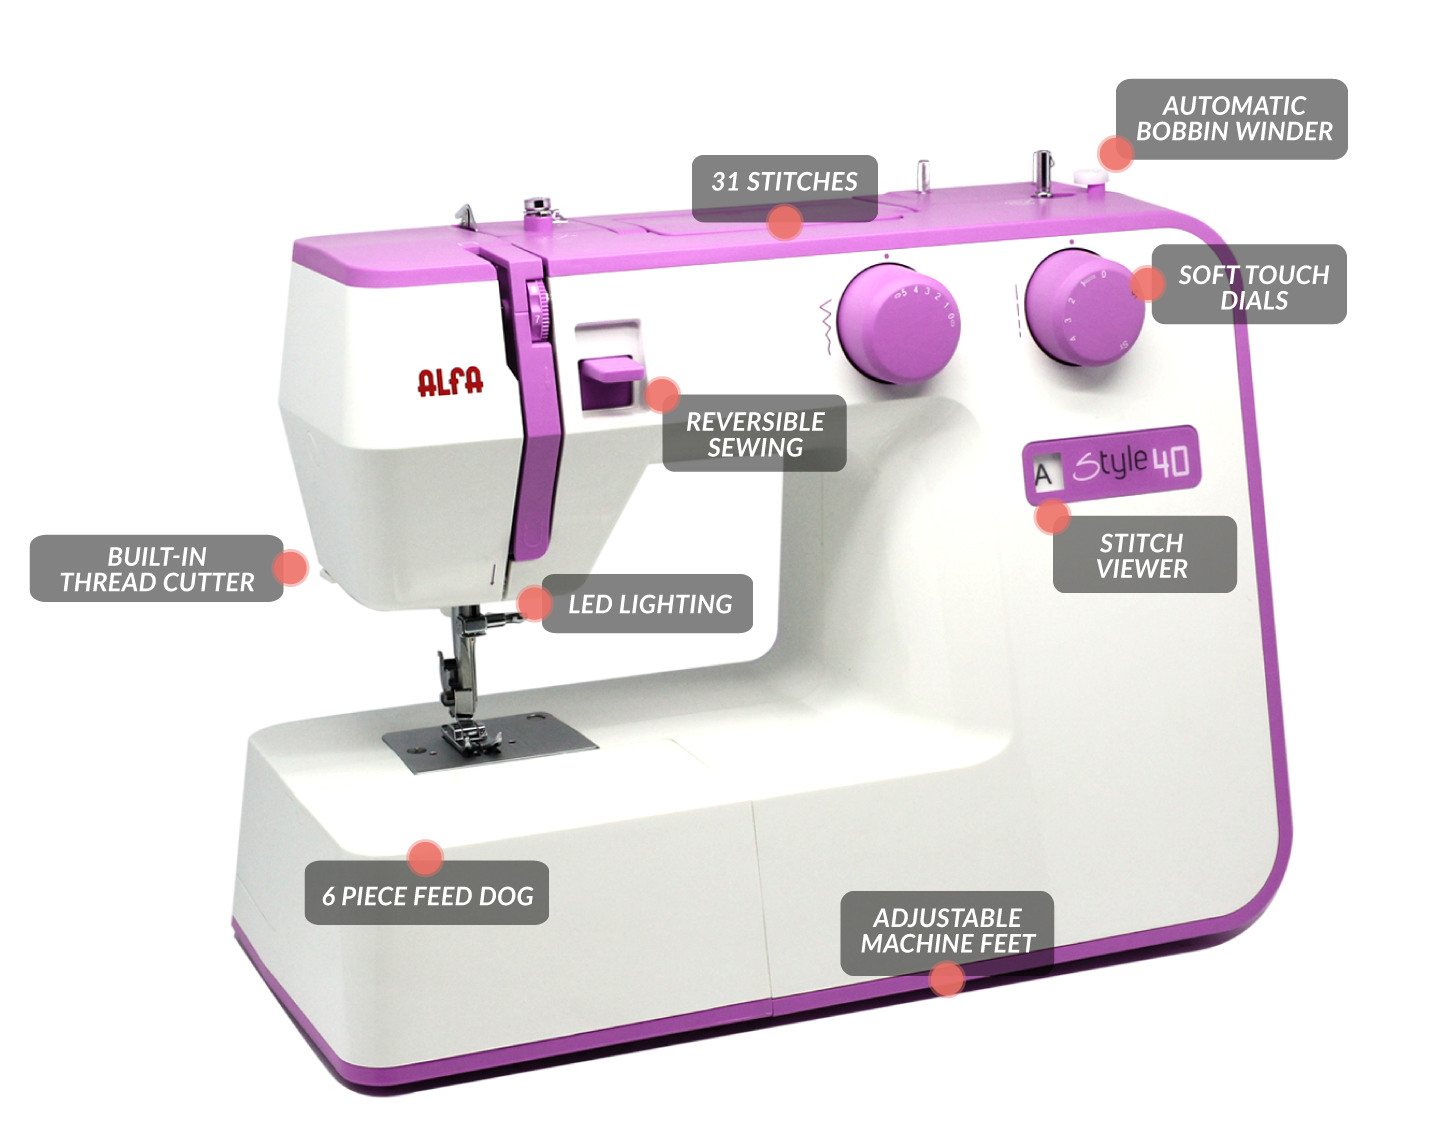 Echidna Sewing Alfa Style 40 machine features